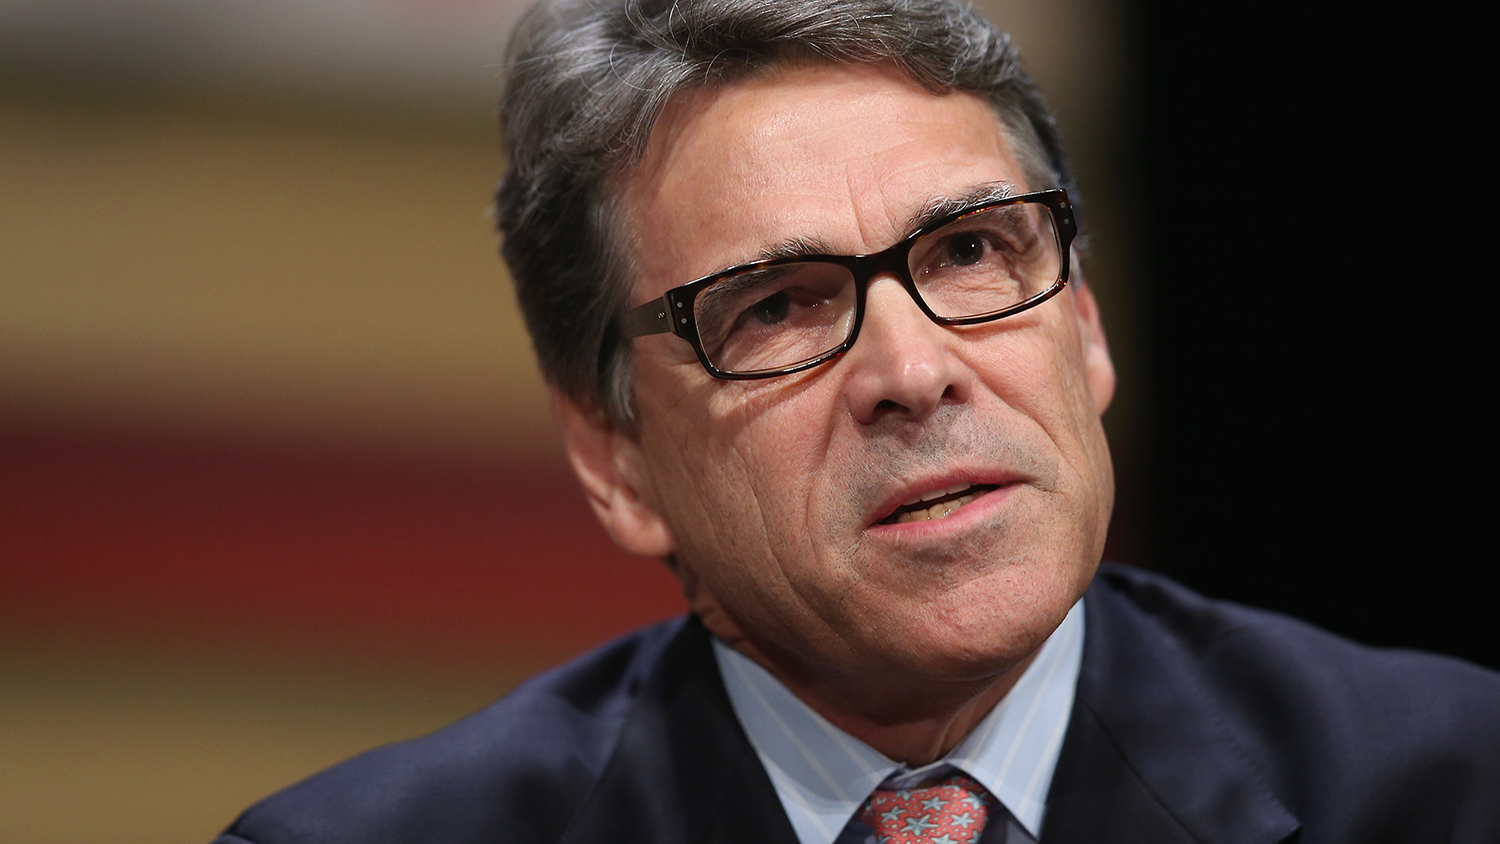 Republican presidential candidate and former Texas Governor Rick Perry fields questions at The Family Leadership Summit at Stephens Auditorium on July 18, 2015 in Ames, Iowa.
